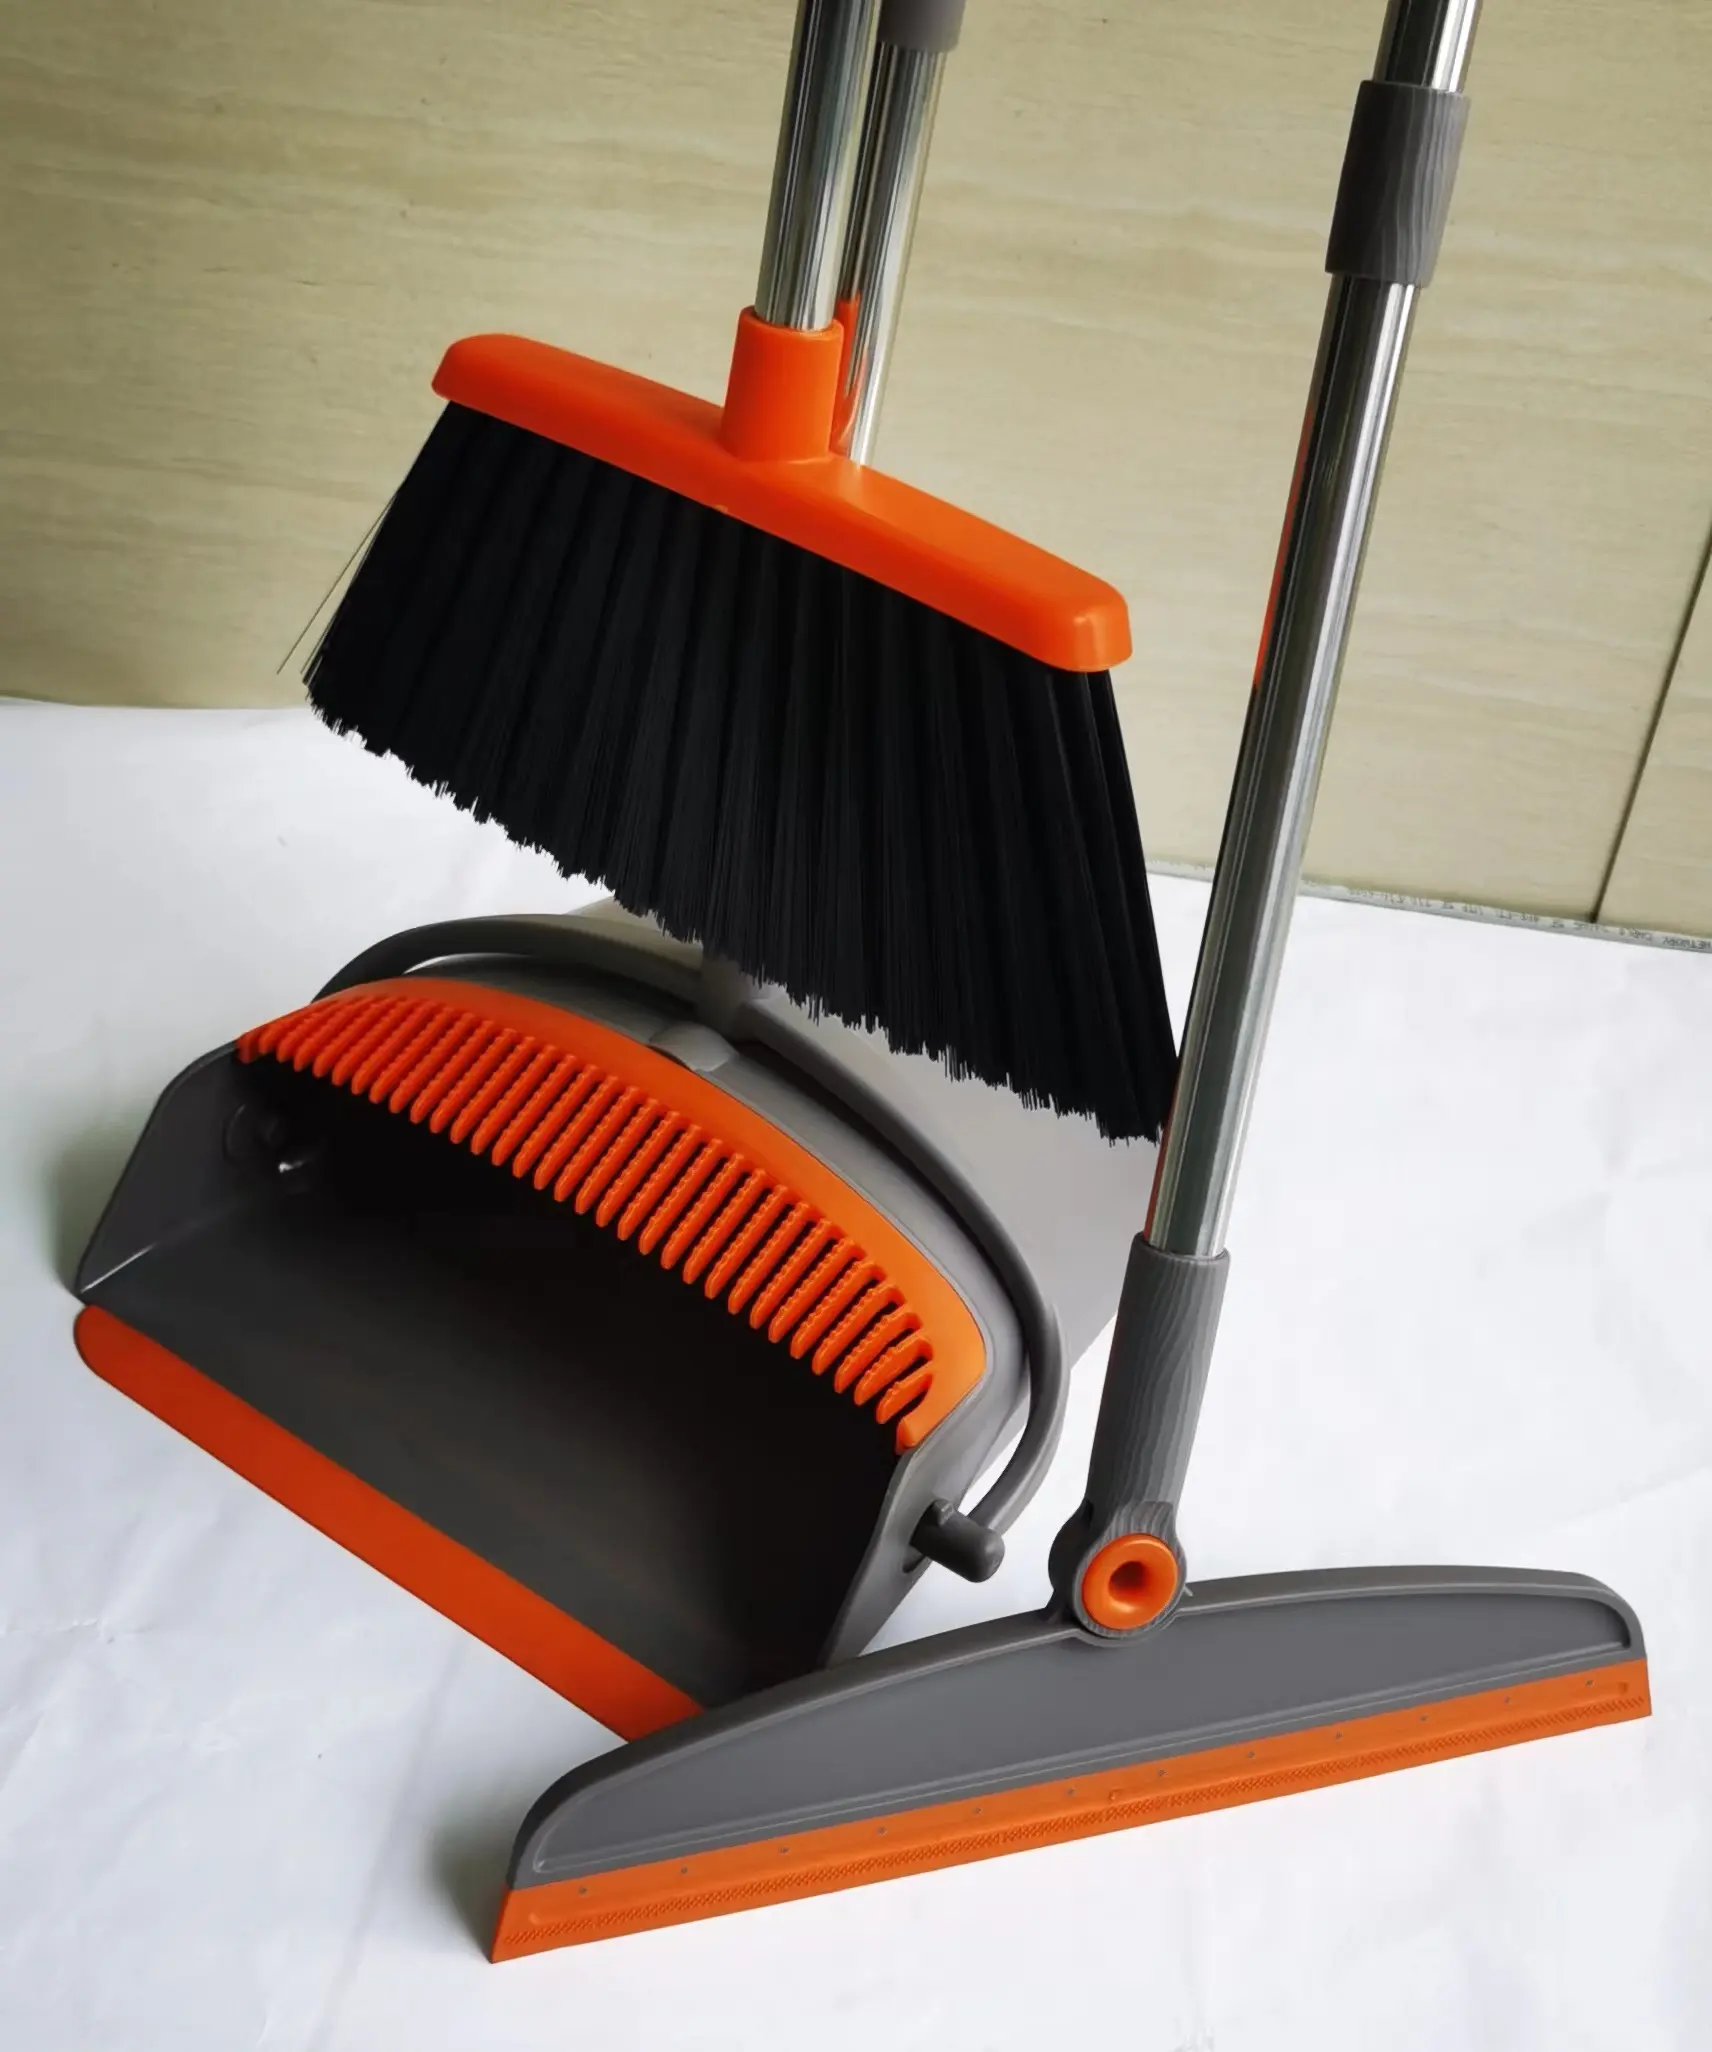 Top Seller Long handle broom and dustpan set comb dustpan for Home Room Kitchen Dustpan with Broom